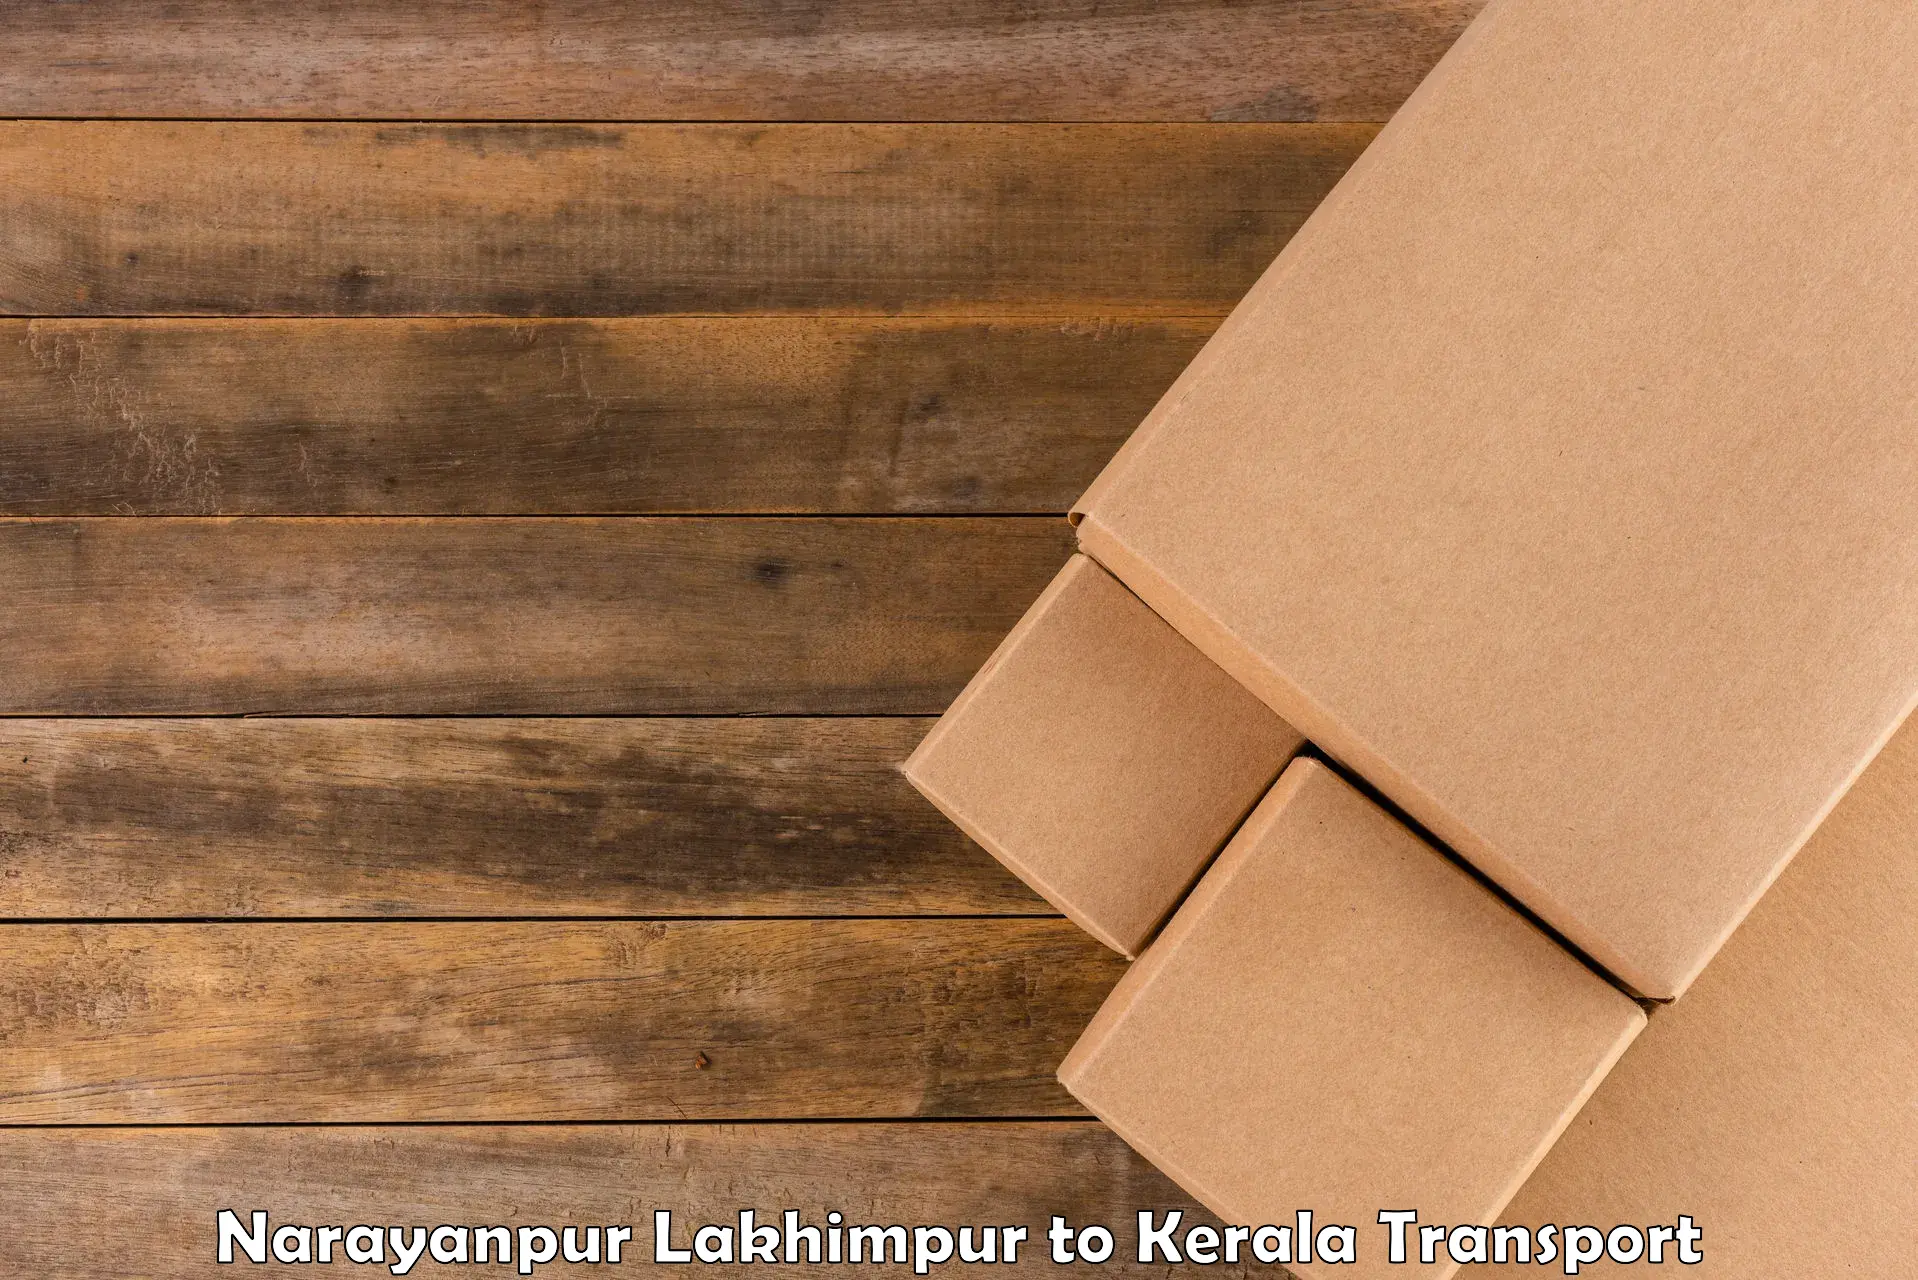 Cargo train transport services in Narayanpur Lakhimpur to Chengannur